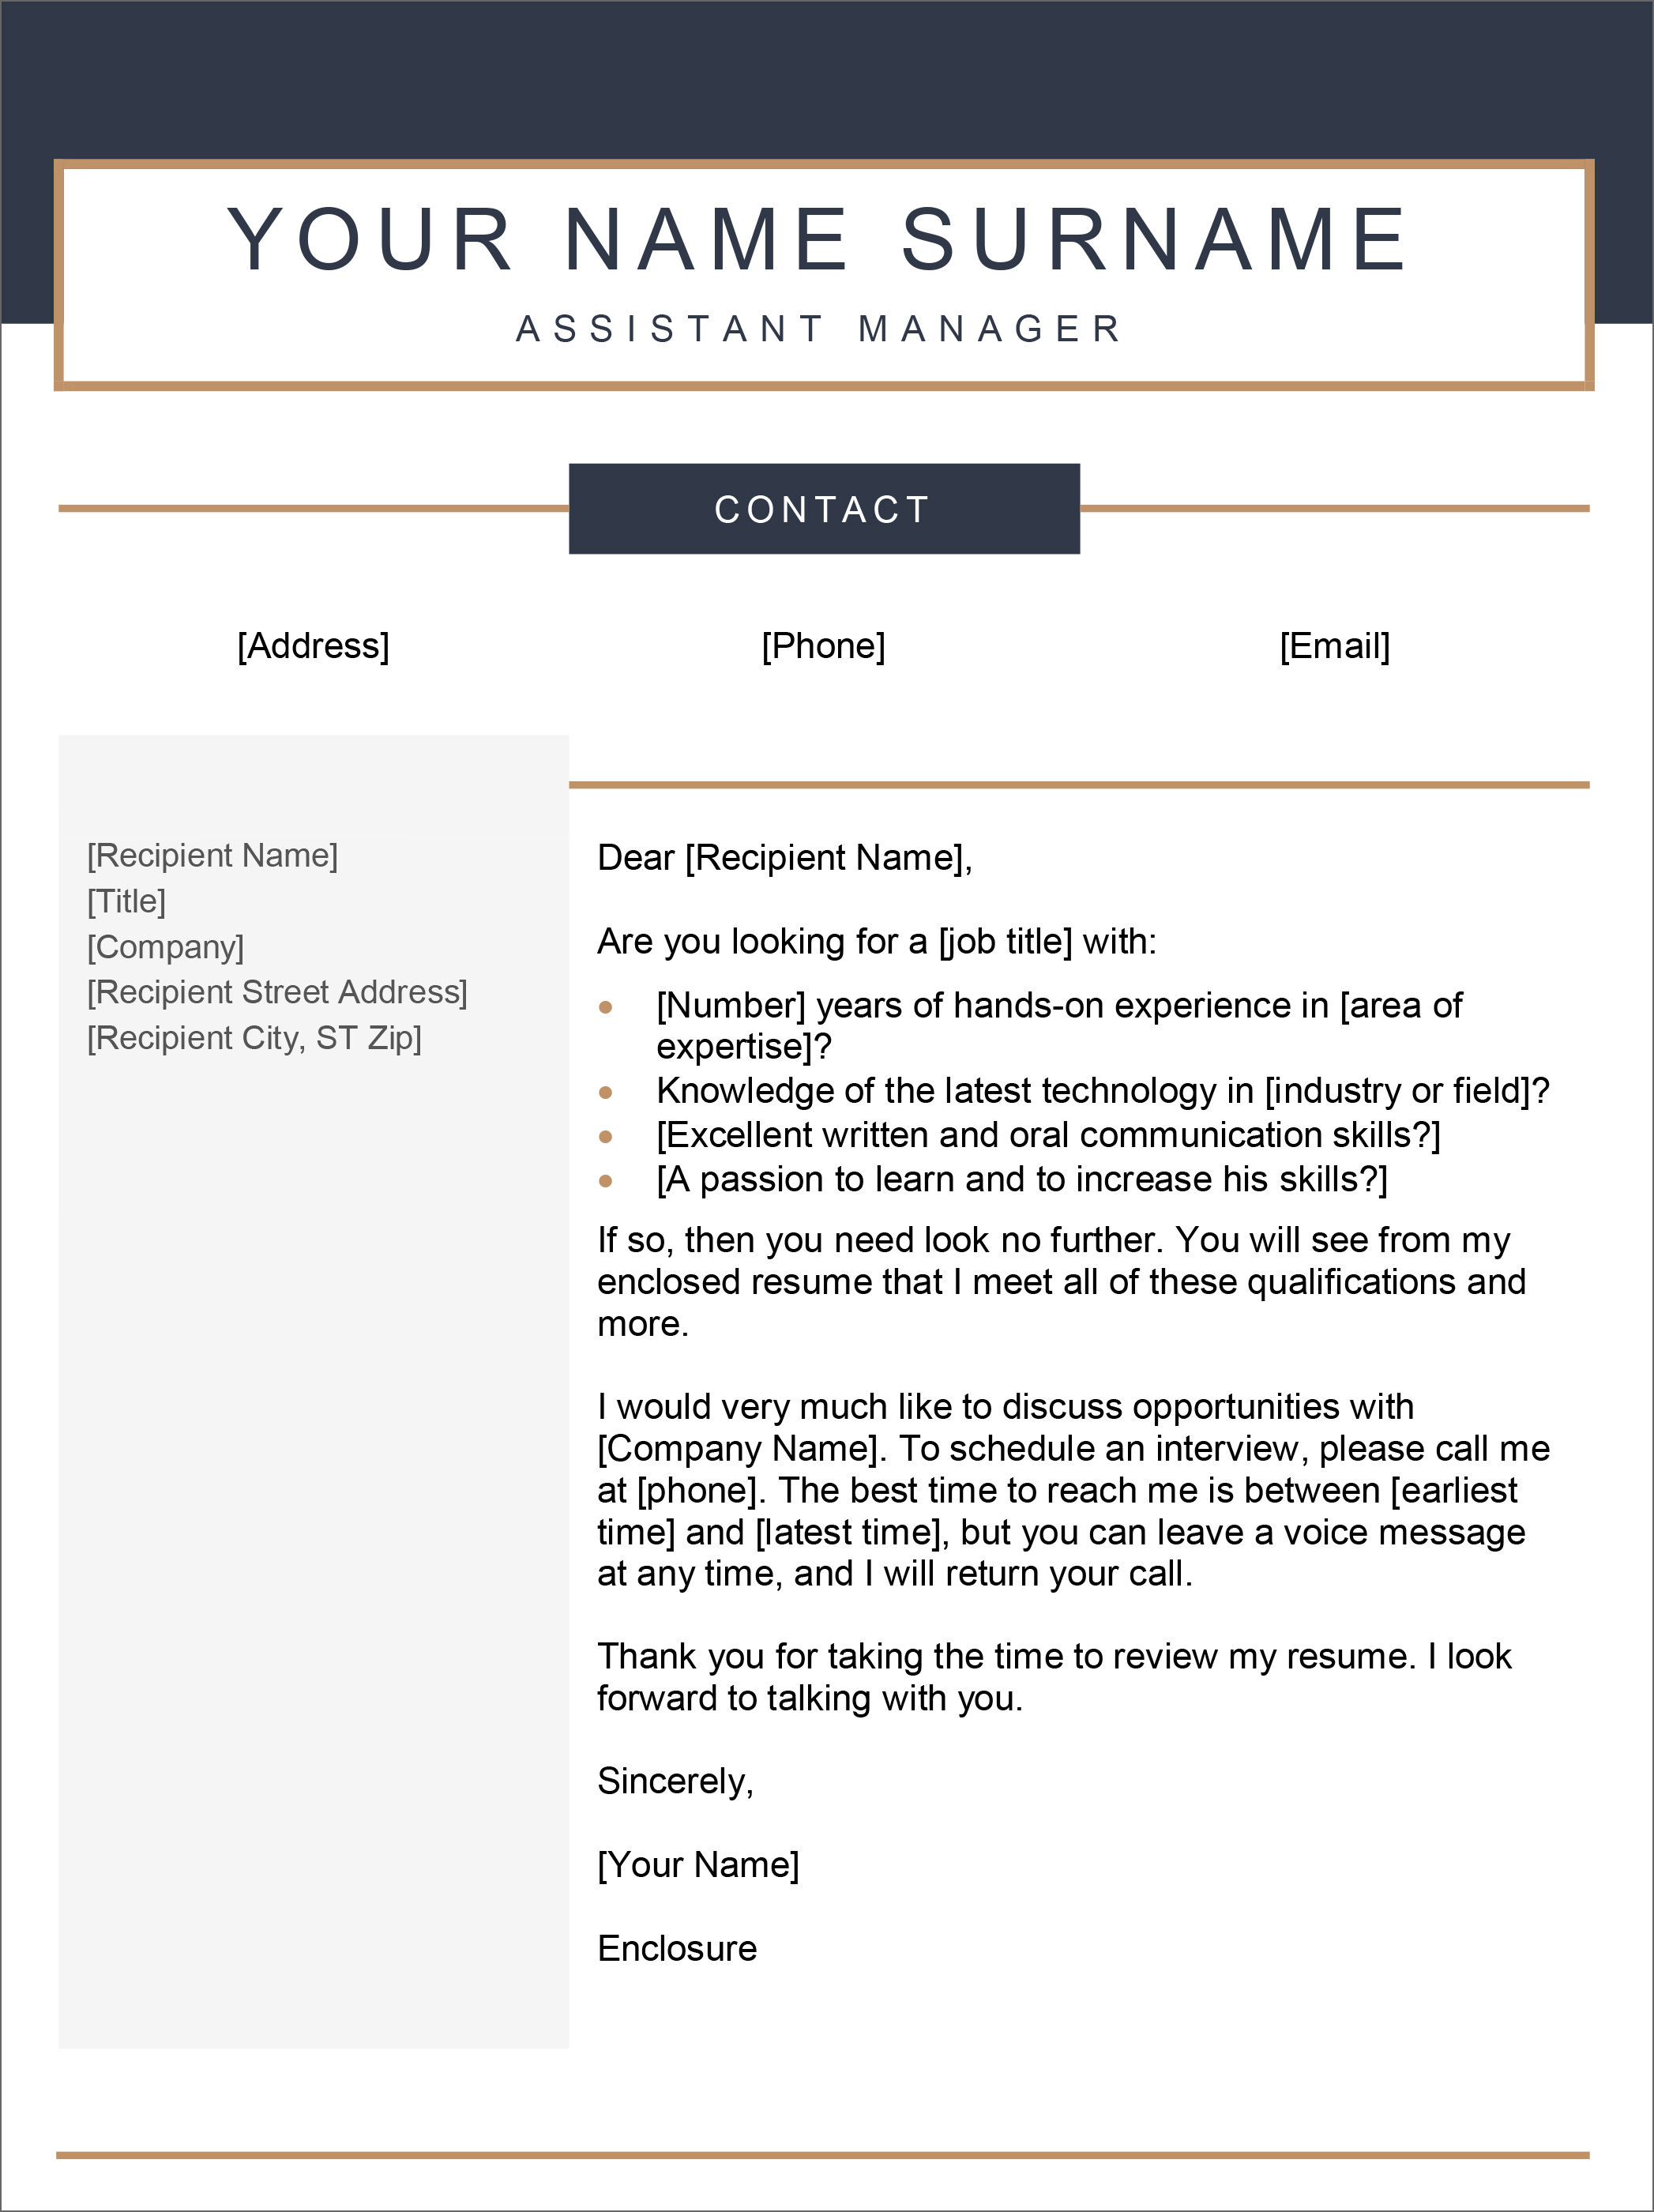 Cover Letter Template Free Word - FREE PRINTABLE TEMPLATES